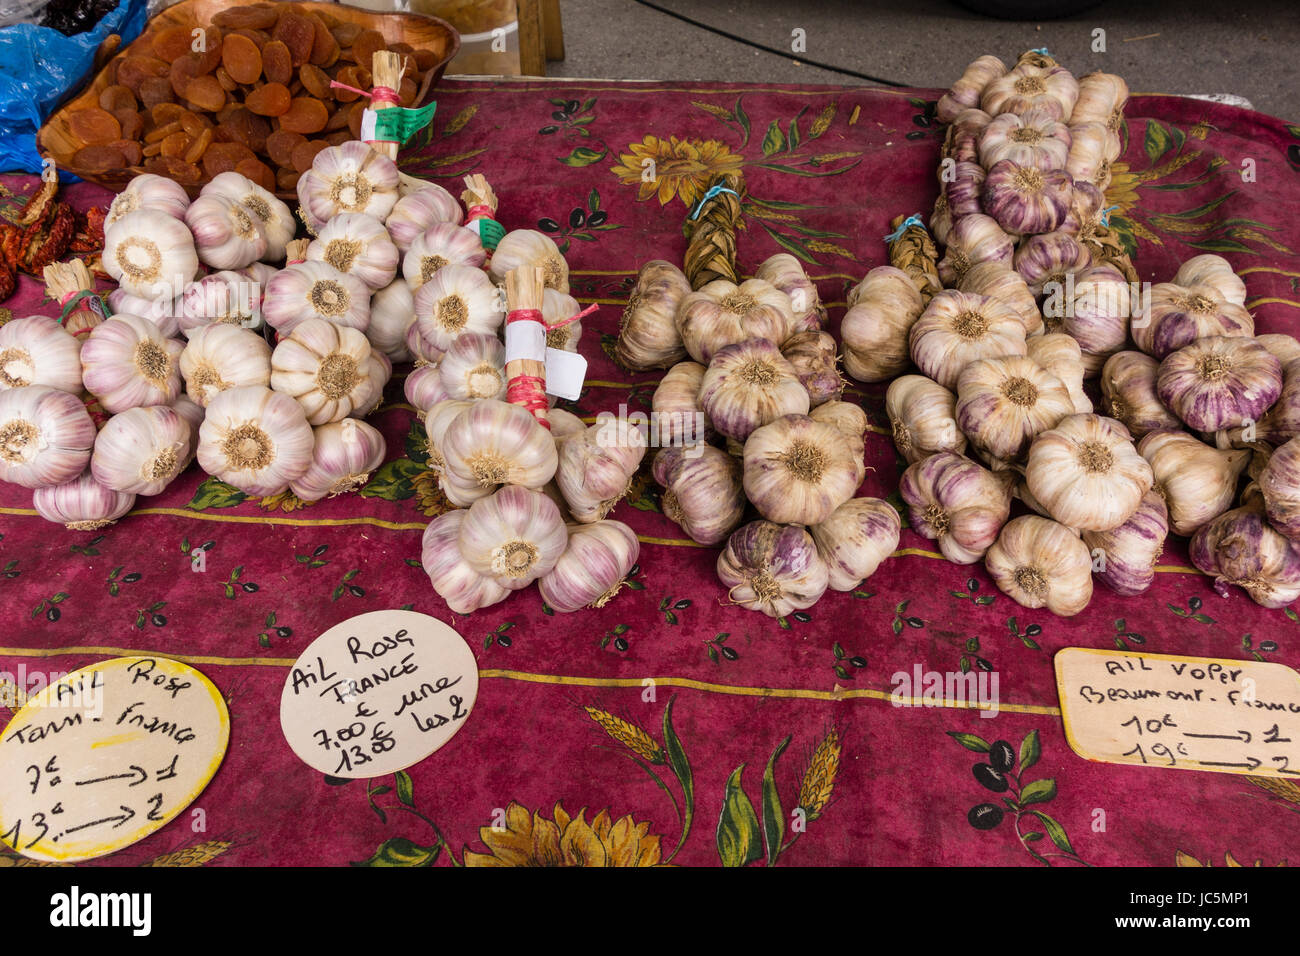 Garlic bunches displayed on a table at a outdoor market Stock Photo